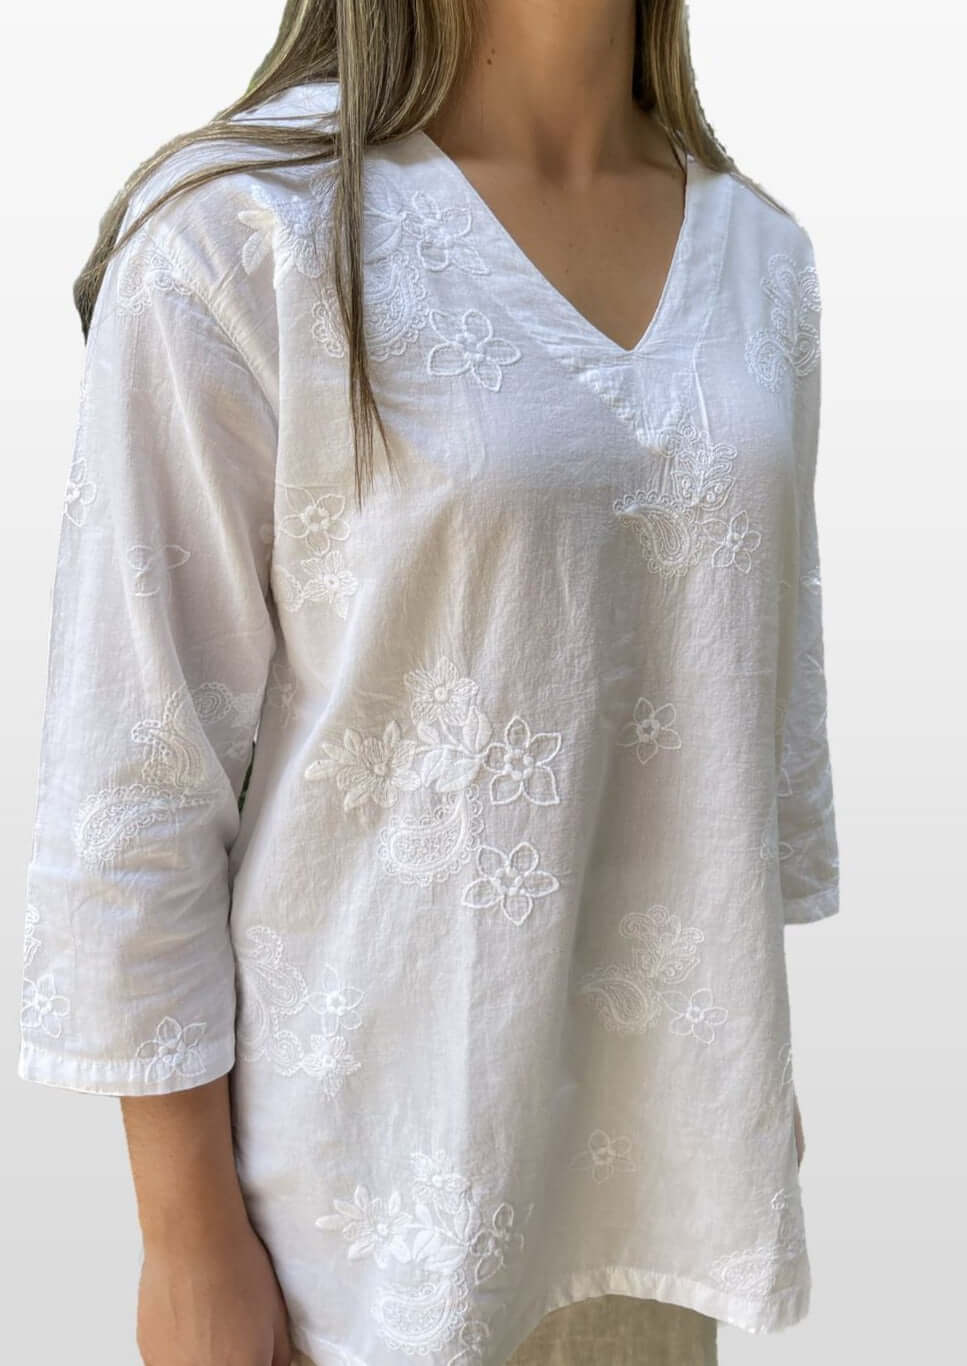 Made in USA Women's 100% Cotton Floral Embroidered Lightweight V-Neck Top with 3/4 Sleeves in White | Classy Cozy Cool Women's Made in America Boutique